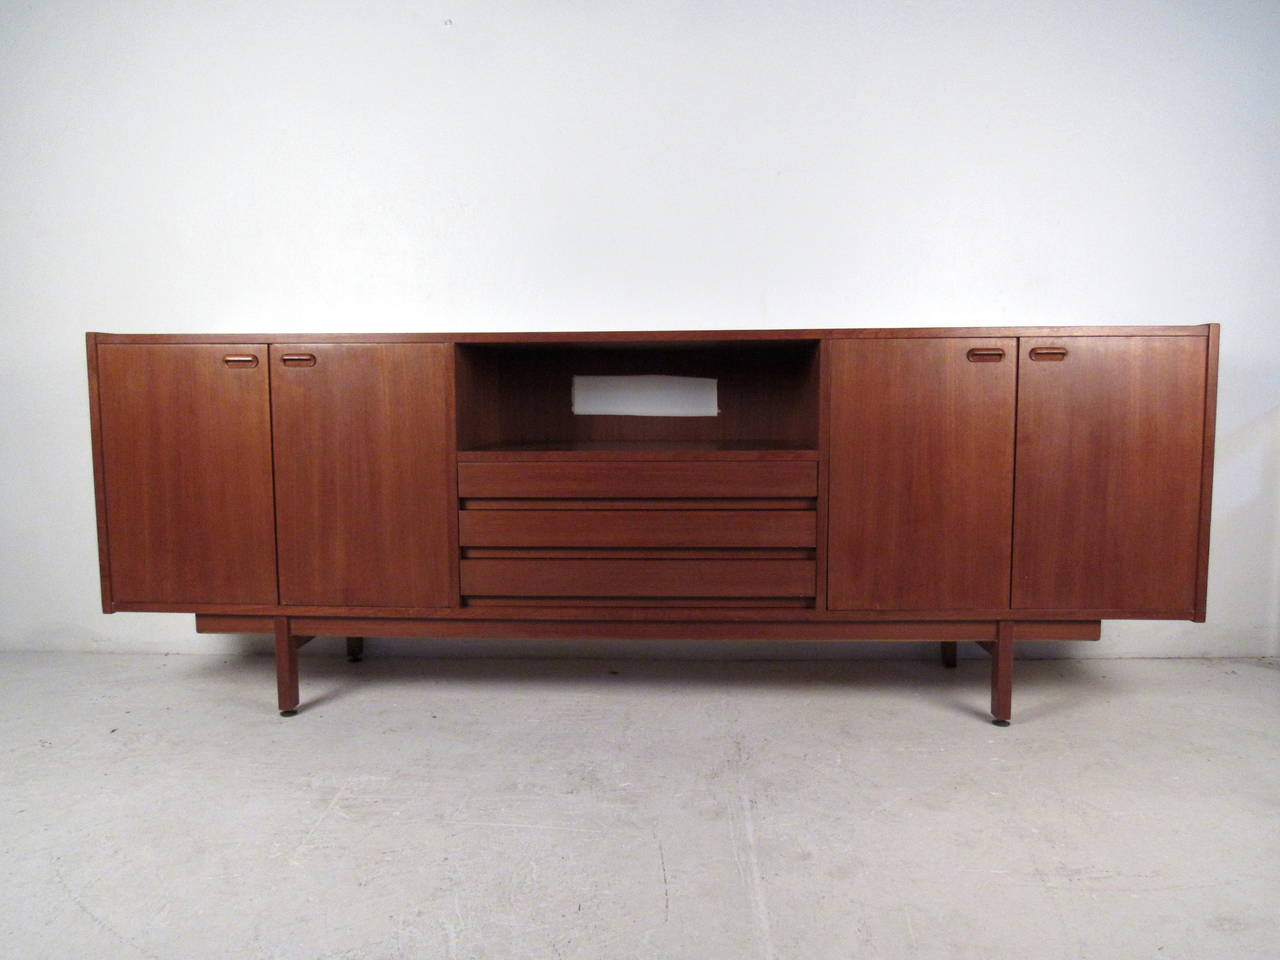 This Danish teak server features two cabinets with carved pulls, felt lined drawers, adjustable interior shelves and a unique stretcher base which offers a modern flare and ample storage to any home or office space.

Please confirm item location